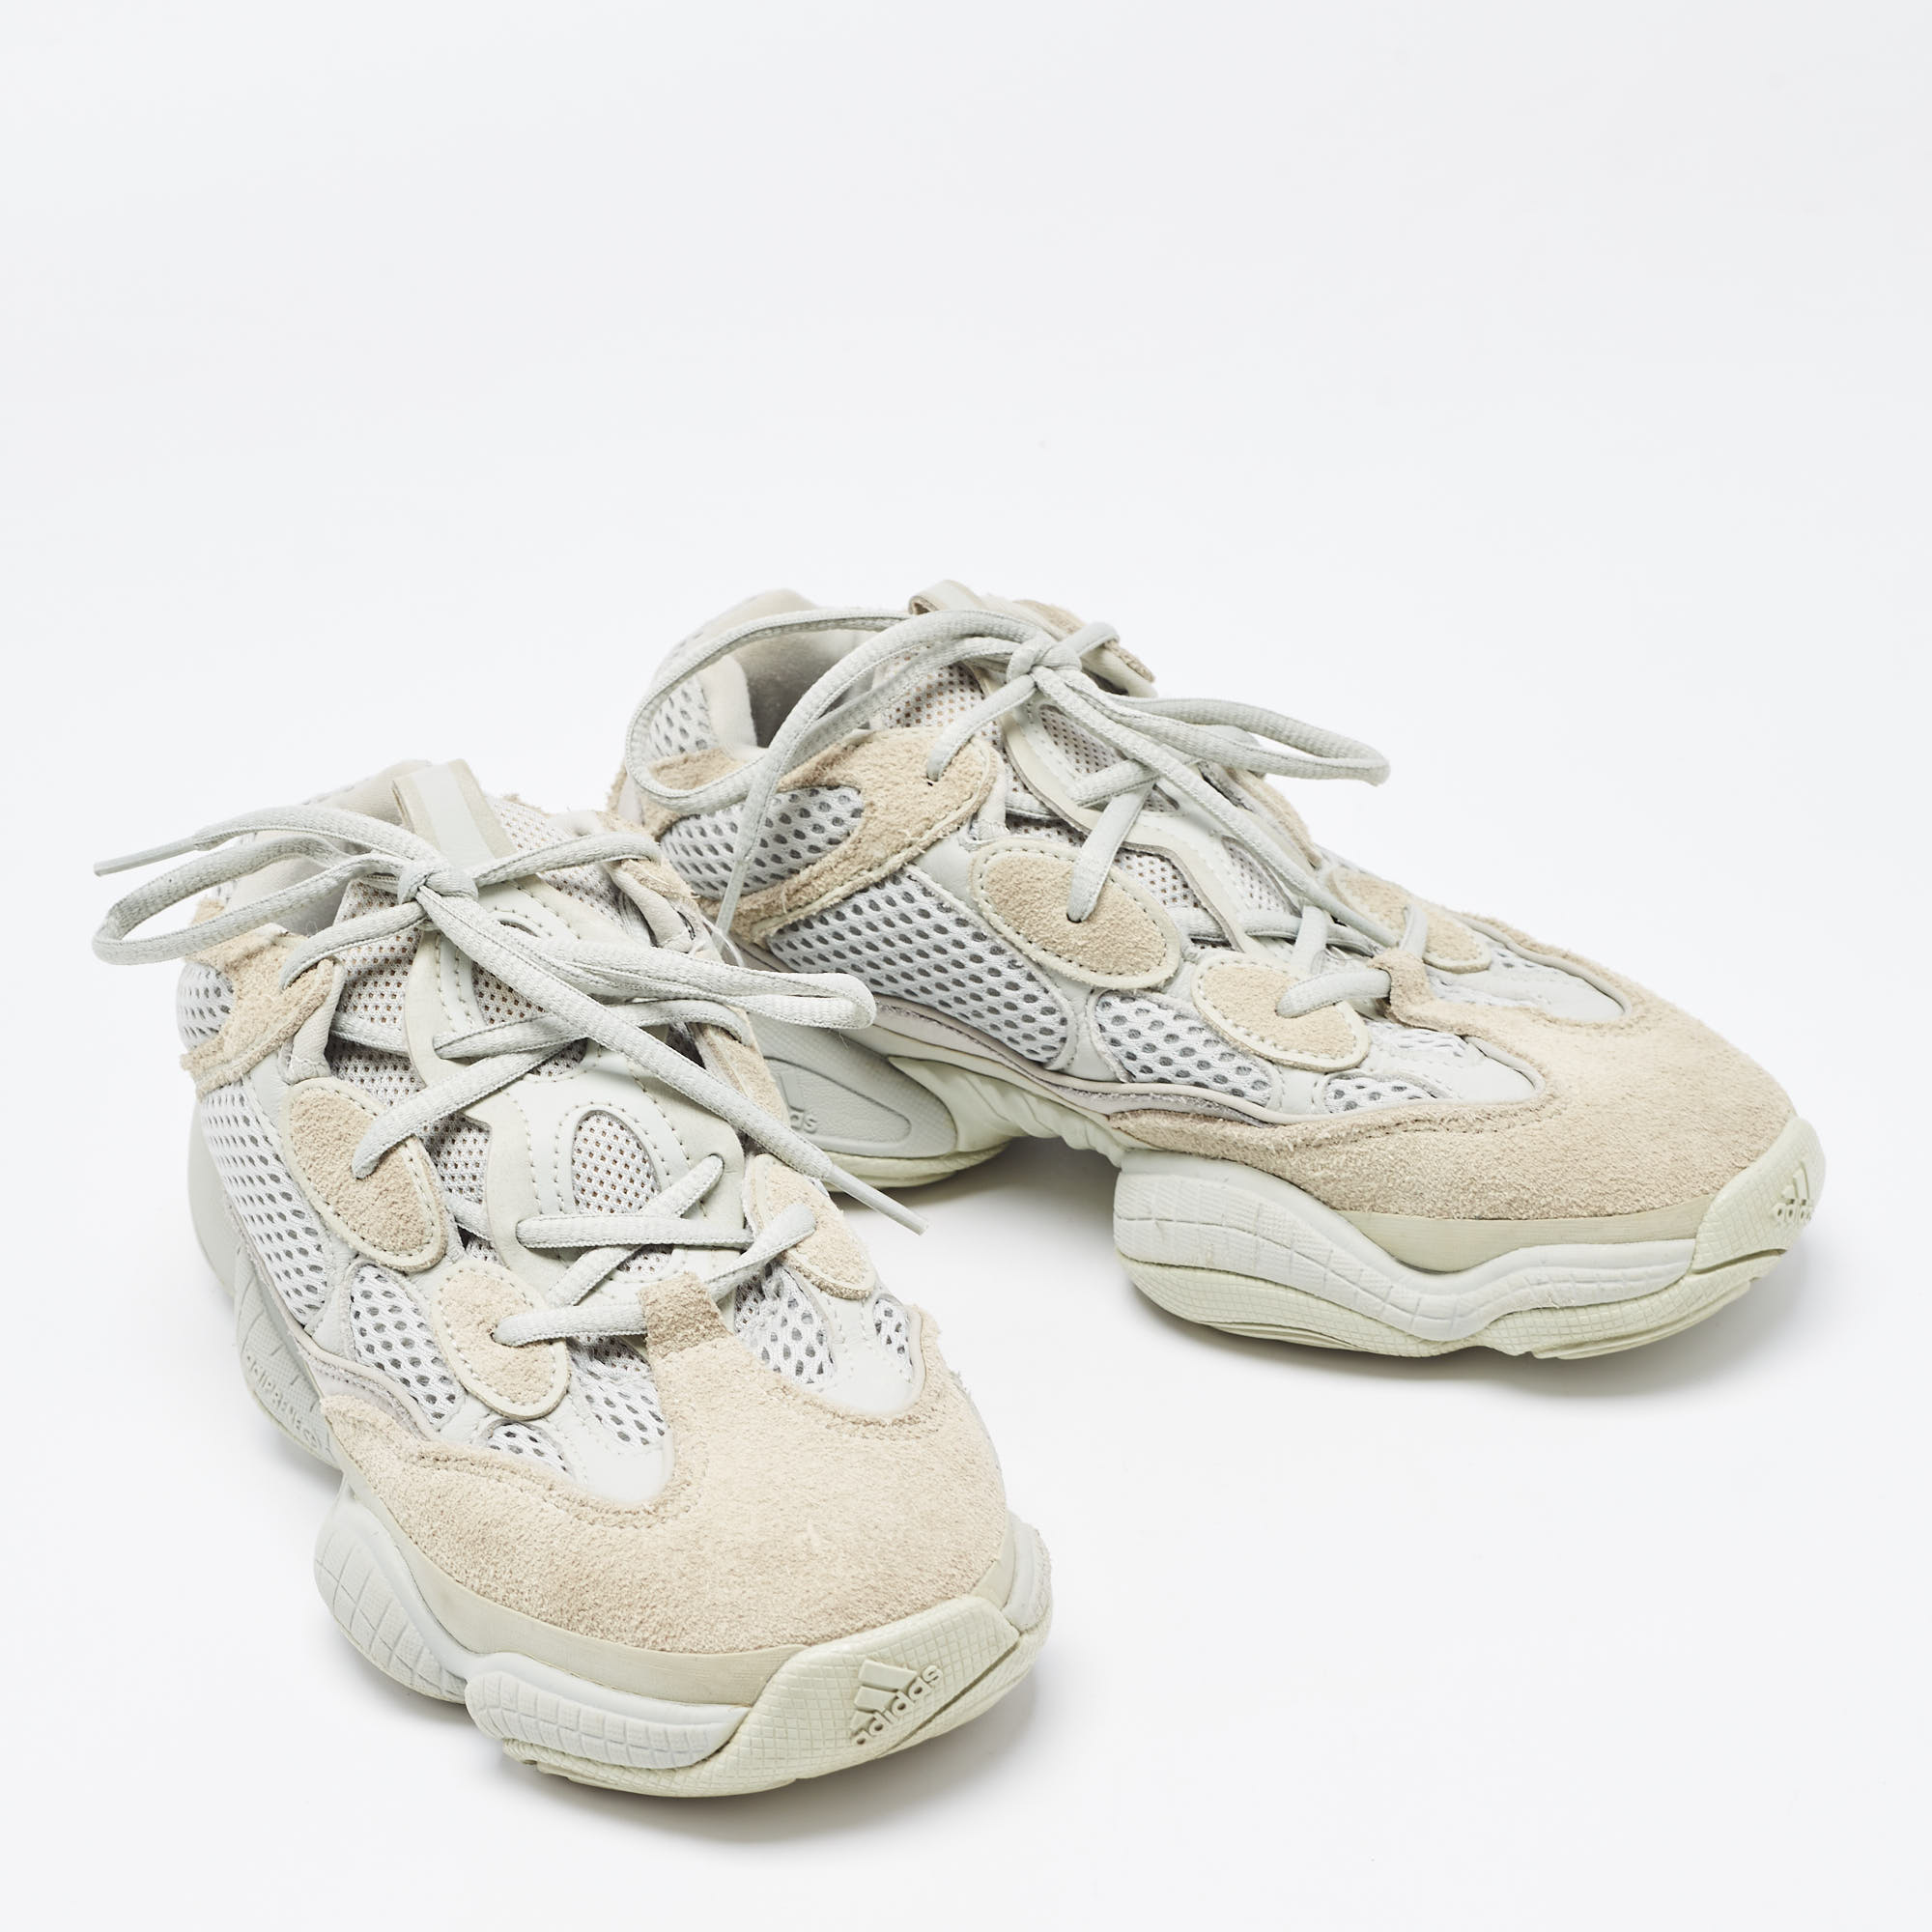 Yeezy X Adidas Two Tone Suede And Mesh Yeezy 500 Salt Sneakers Size 38